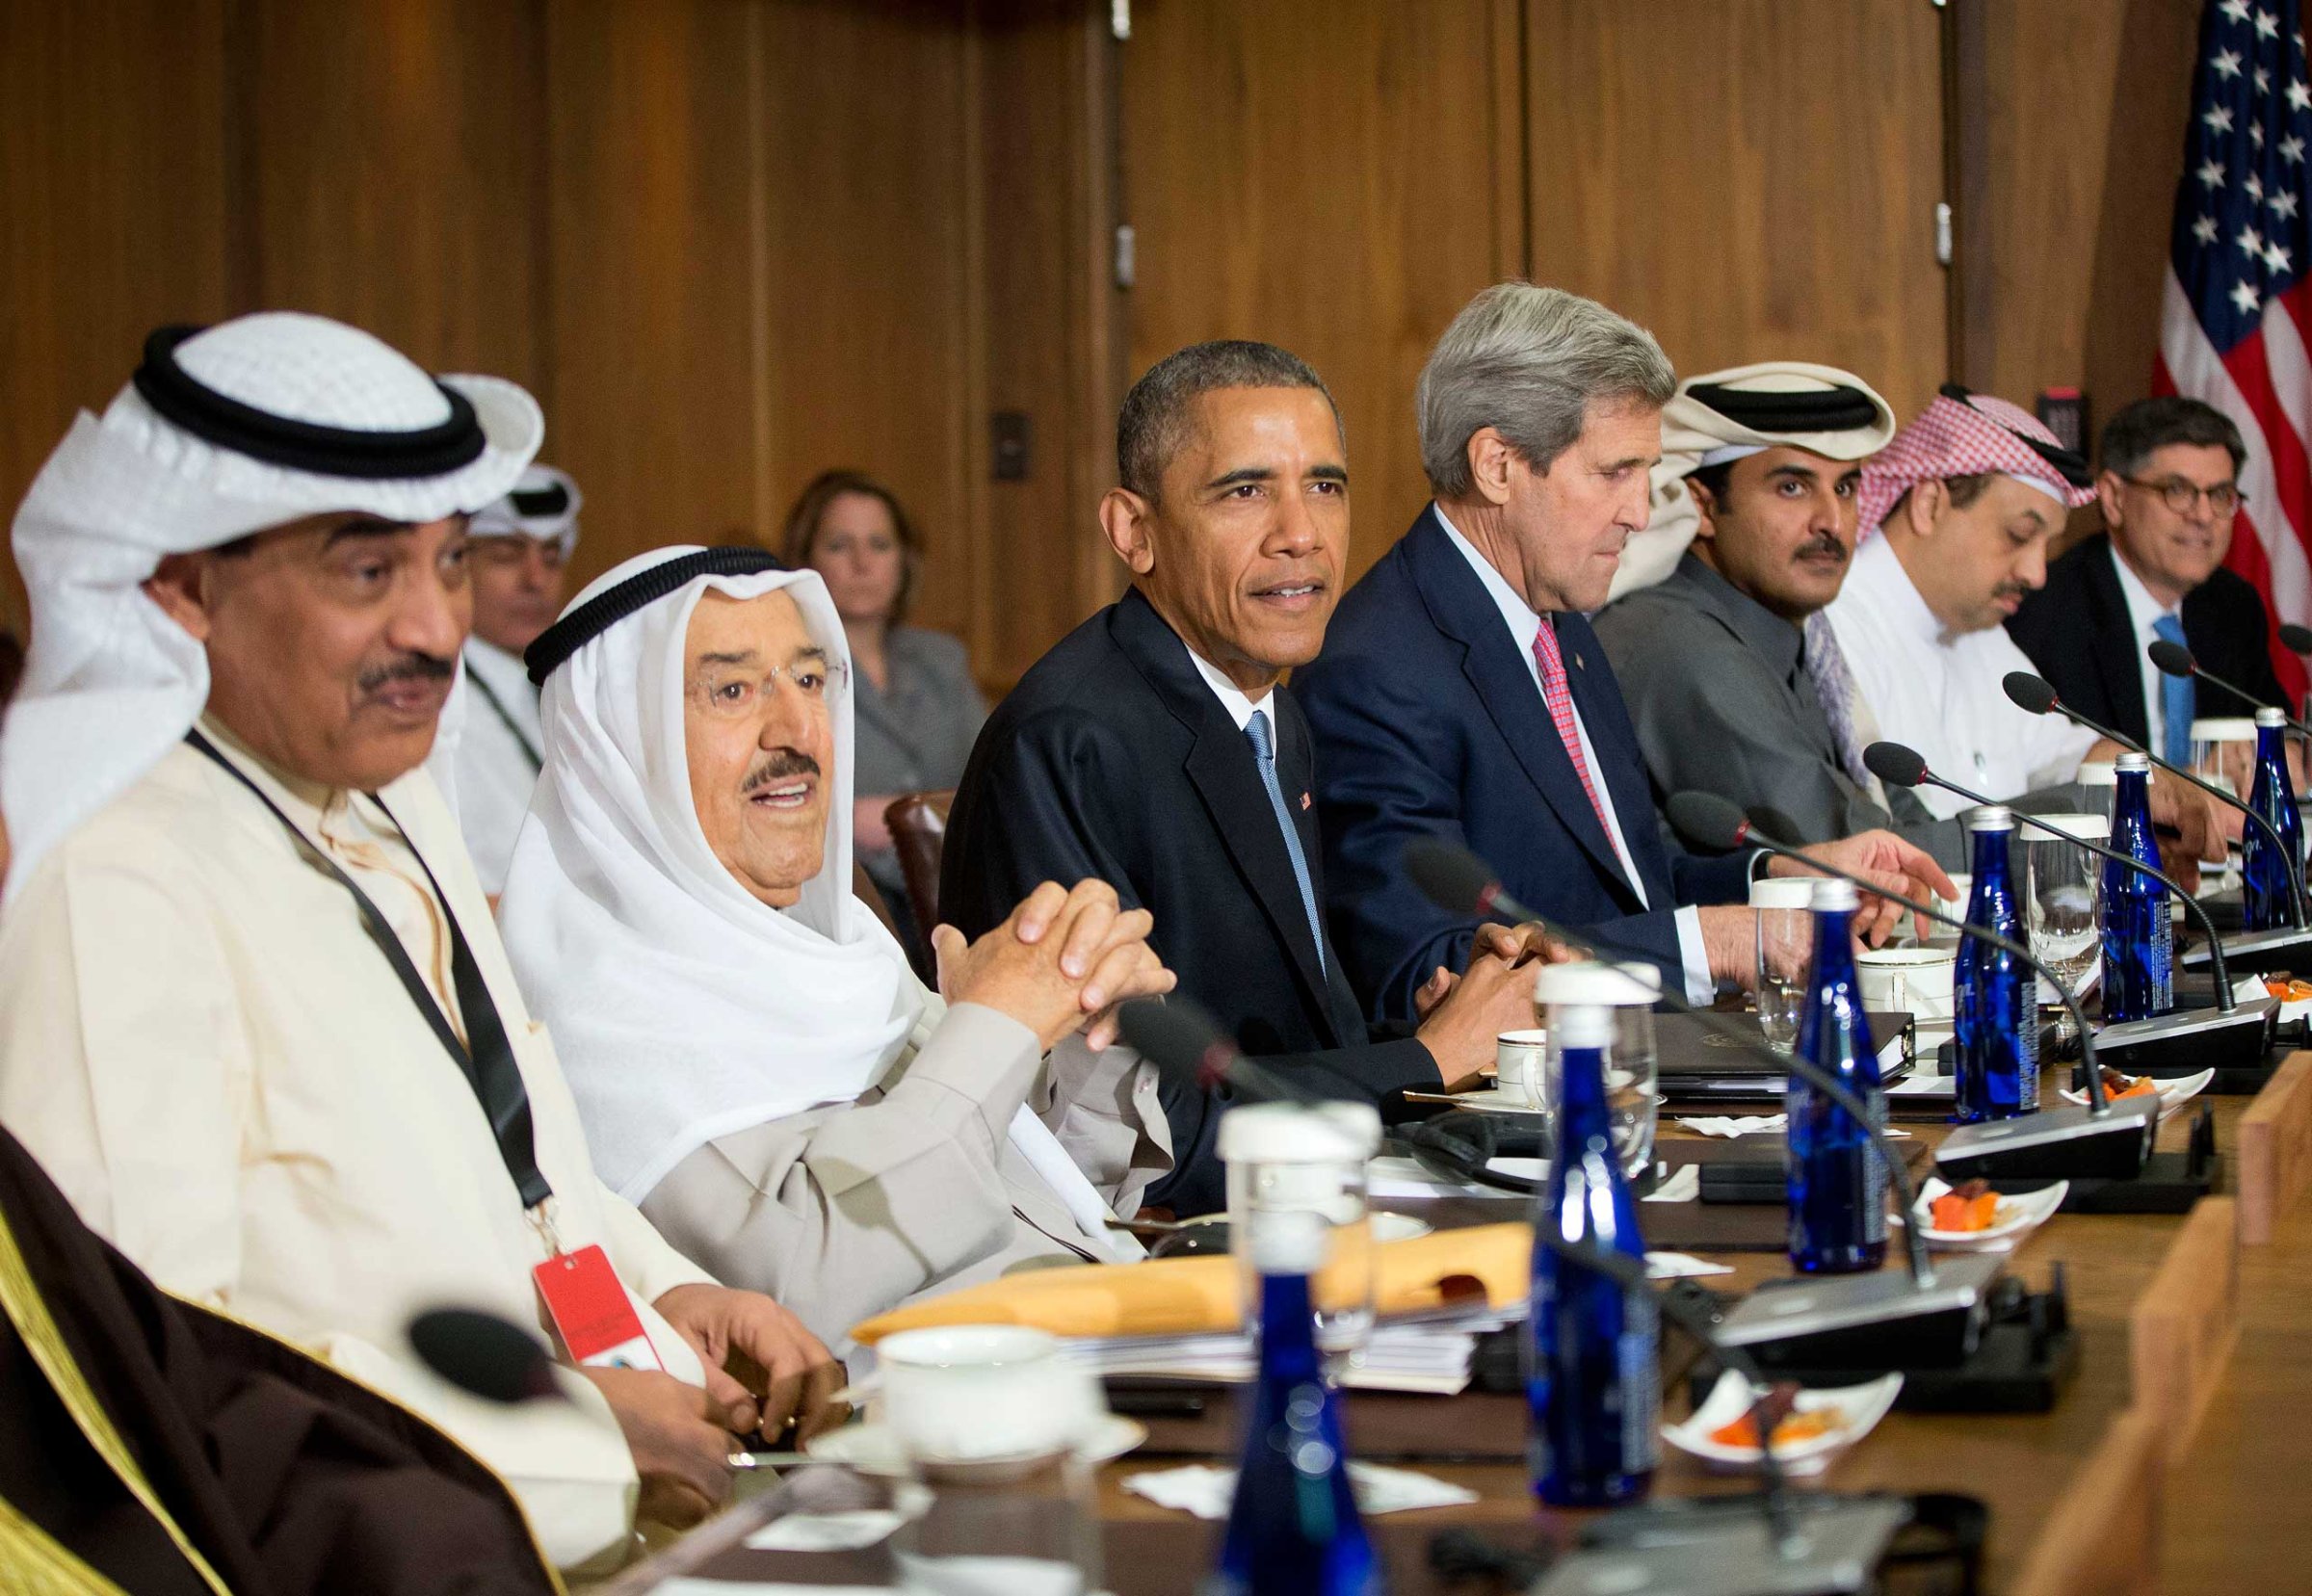 President Barack Obama sits with Kuwaiti Emir Sheikh Sabah Al-Ahmad Al-Sabah, left center, Secretary of State John Kerry, right center, and other Gulf Cooperation Council leaders and delegations at Camp David, Md., on May 14, 2015.